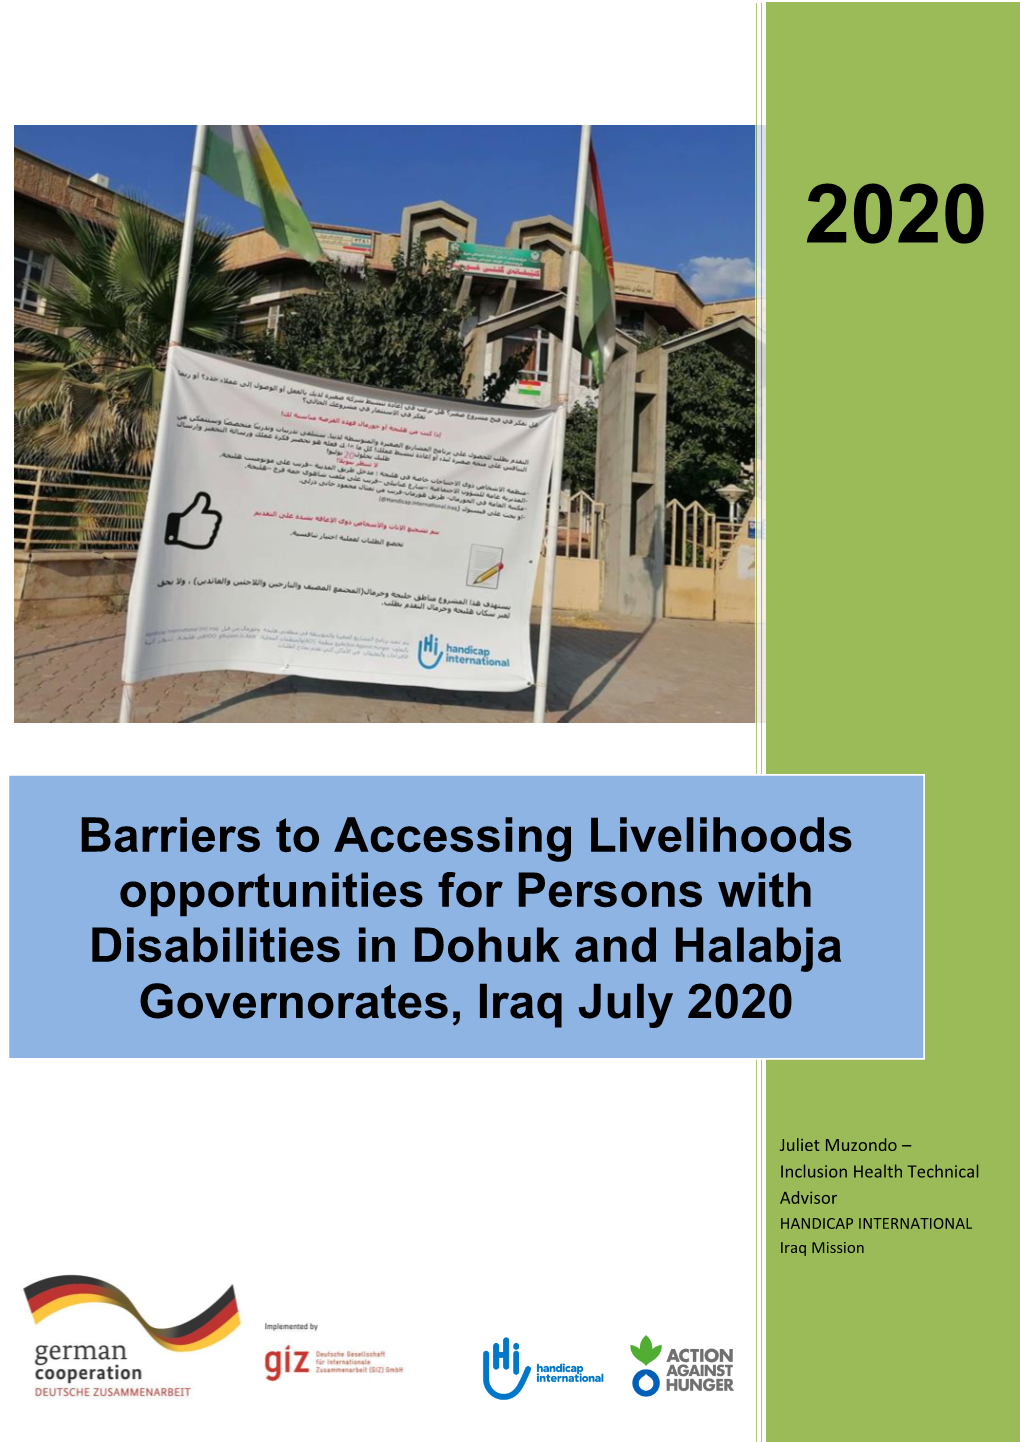 Barriers to Accessing Livelihoods Opportunities for Persons with Disabilities in Dohuk and Halabja Governorates, Iraq July 2020